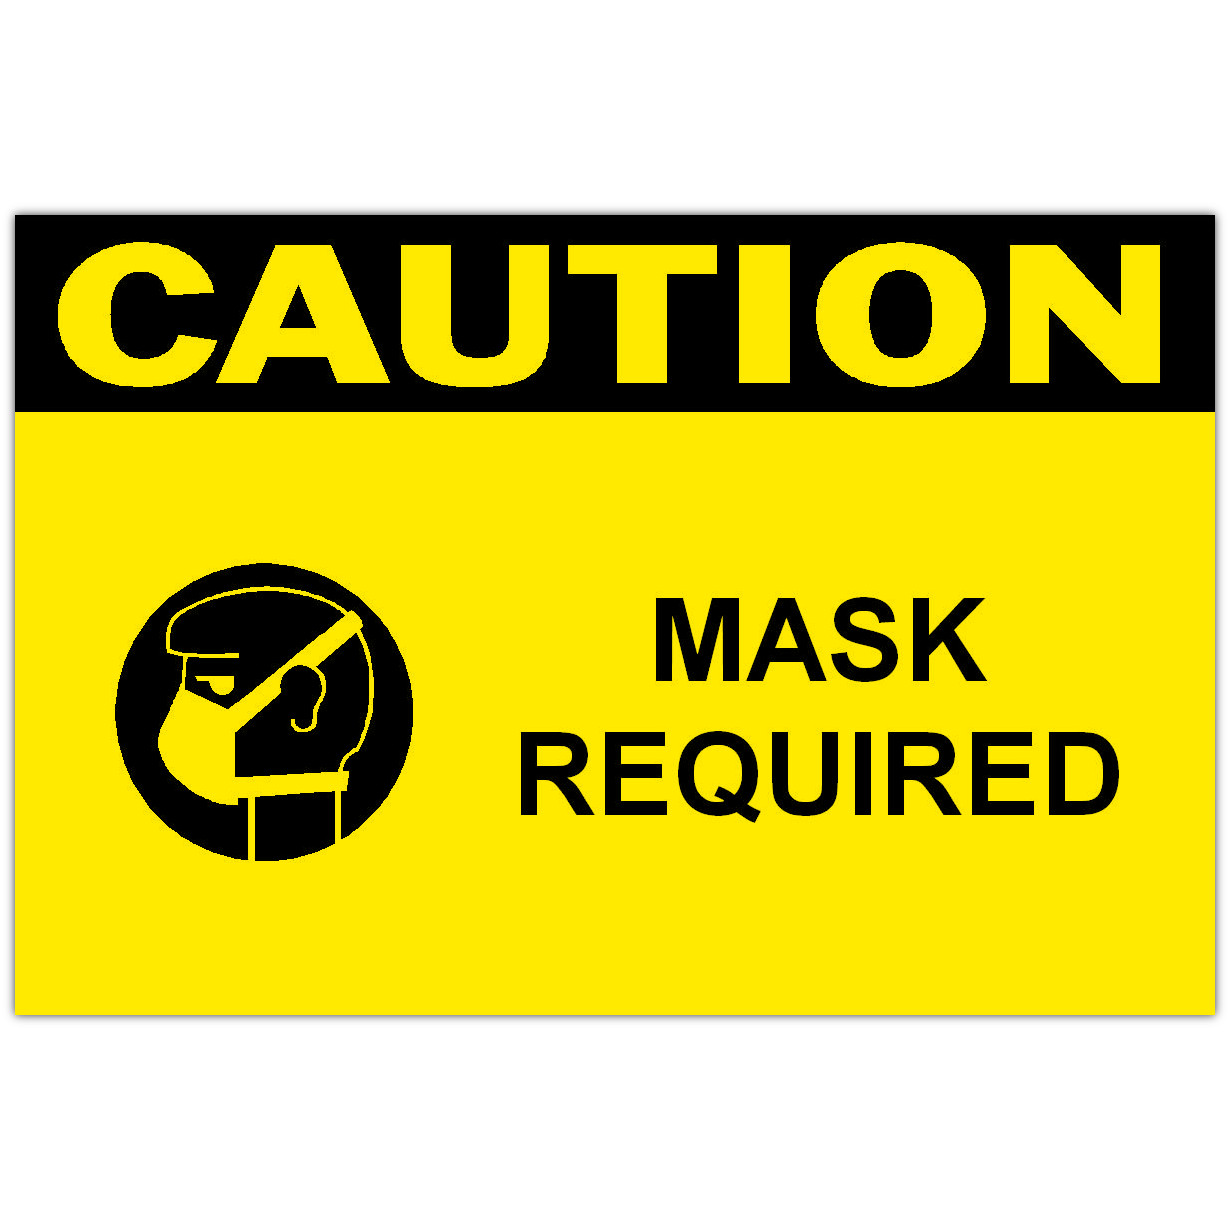 Detail view for 4" x 6" CAUTION Mask Required Safety Label